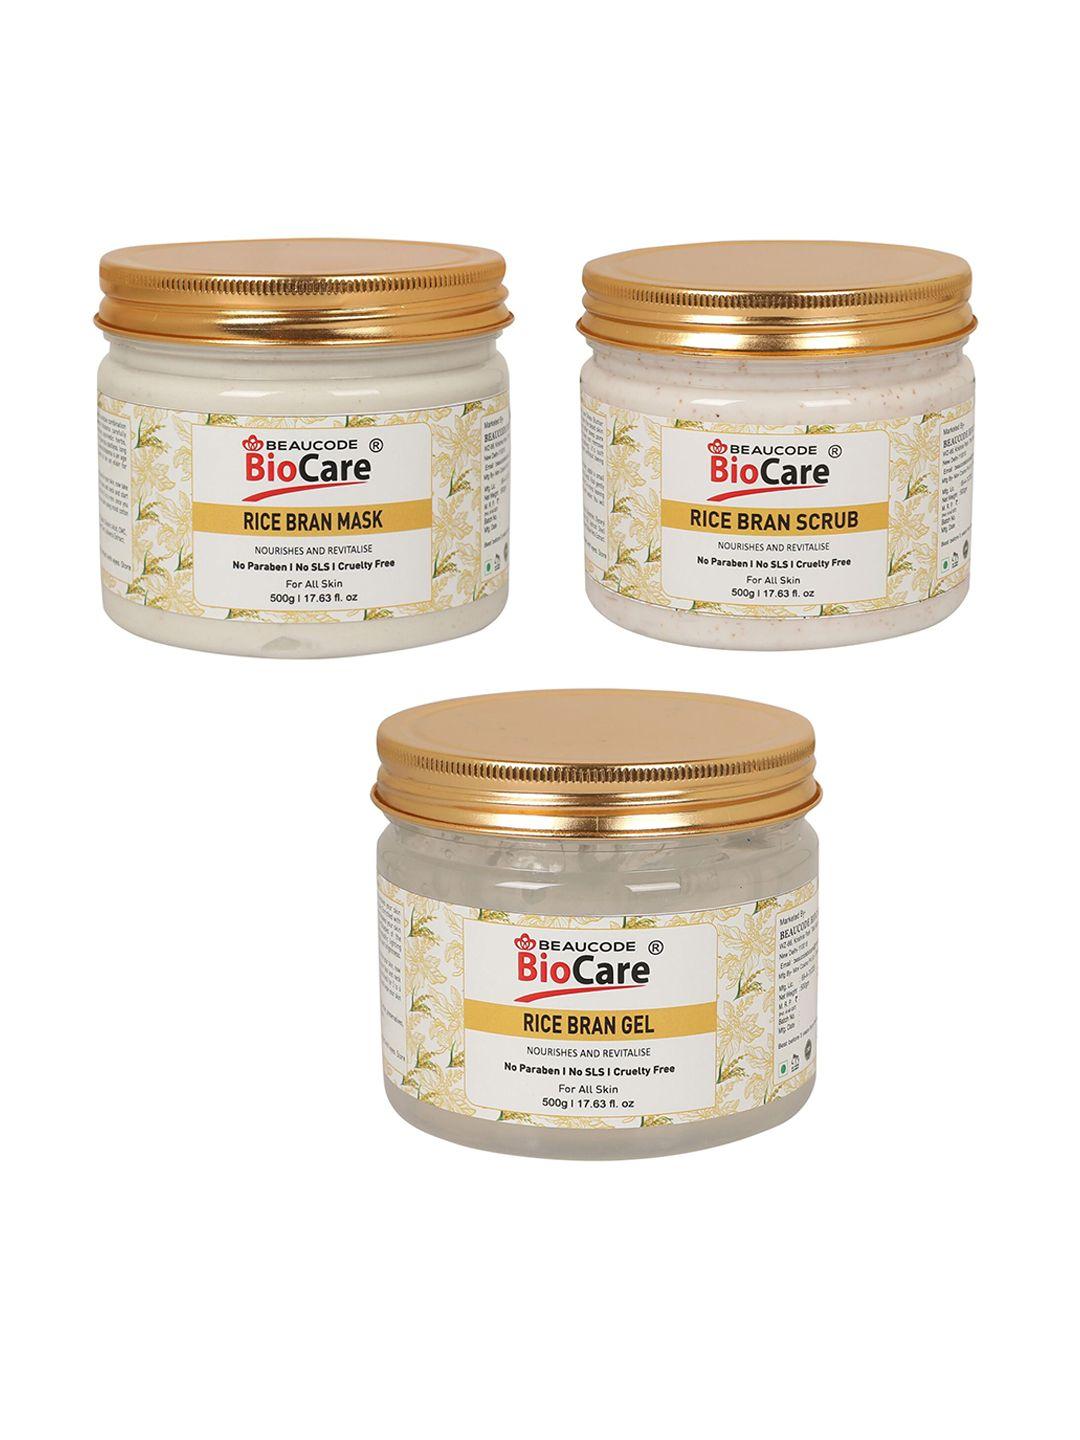 beaucode biocare rice bran facial kit for all skin types - 1500 g